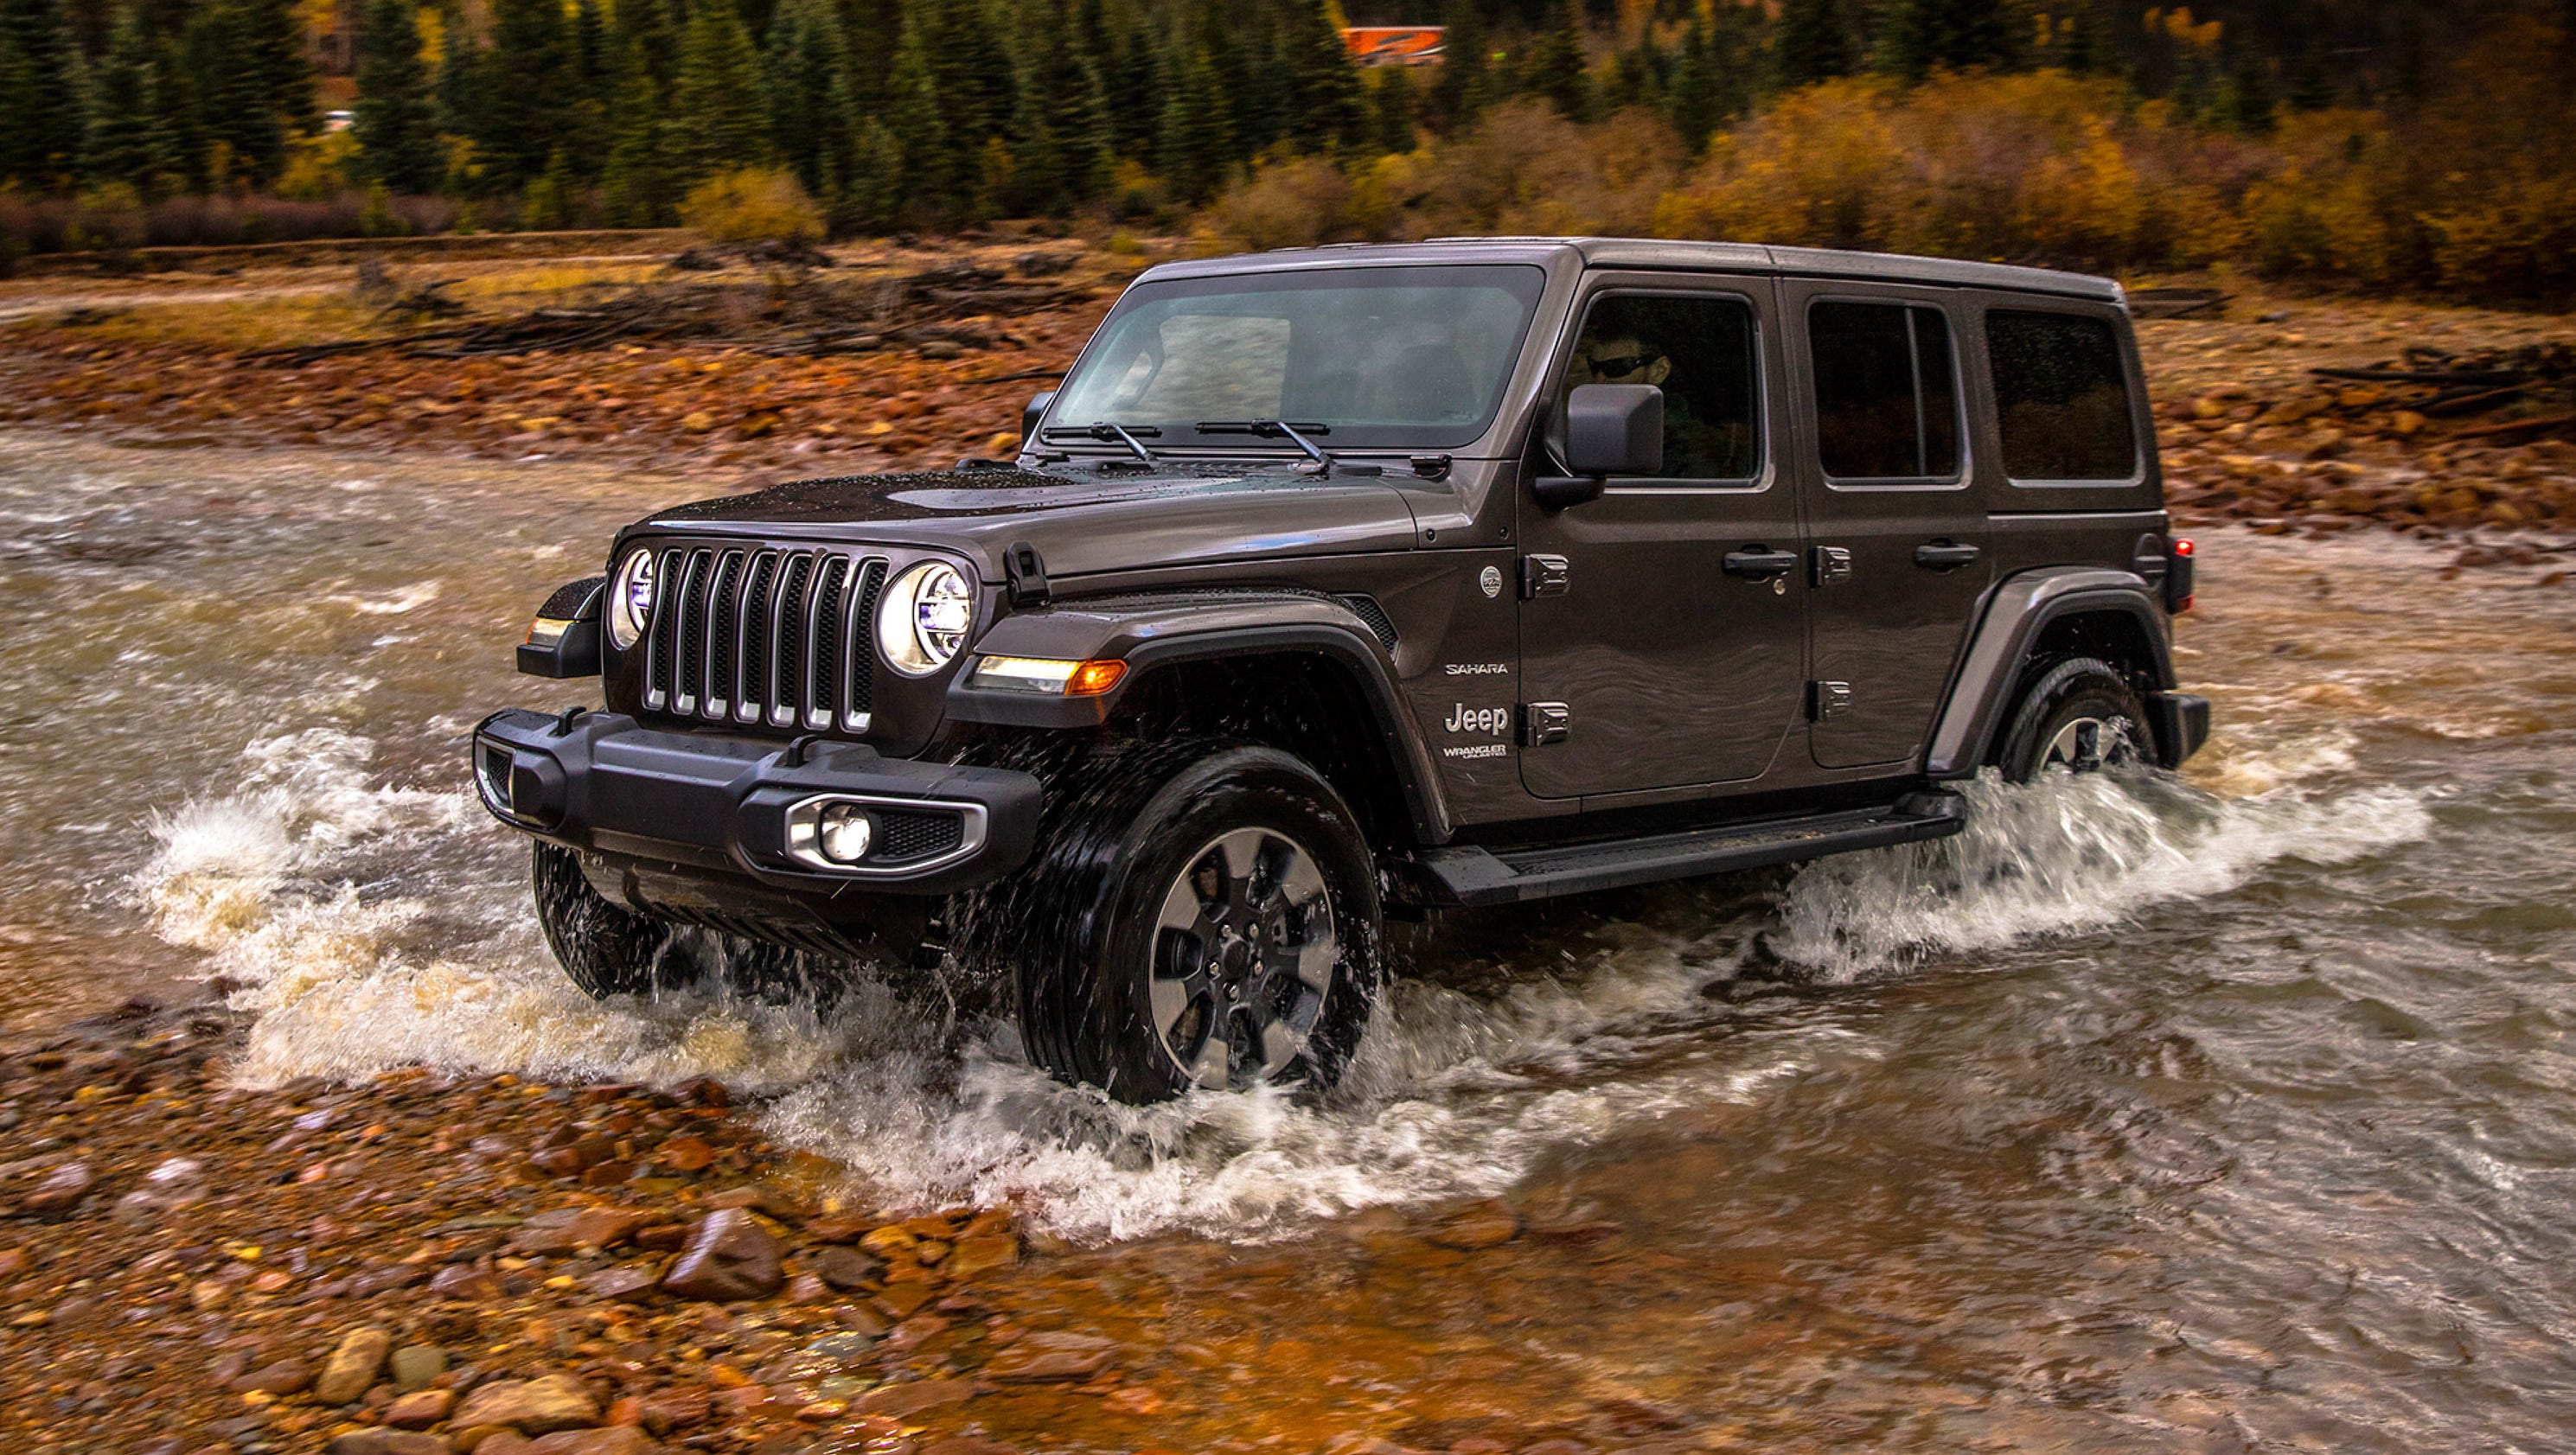 FCA plans electric Jeep Wrangler in 2020